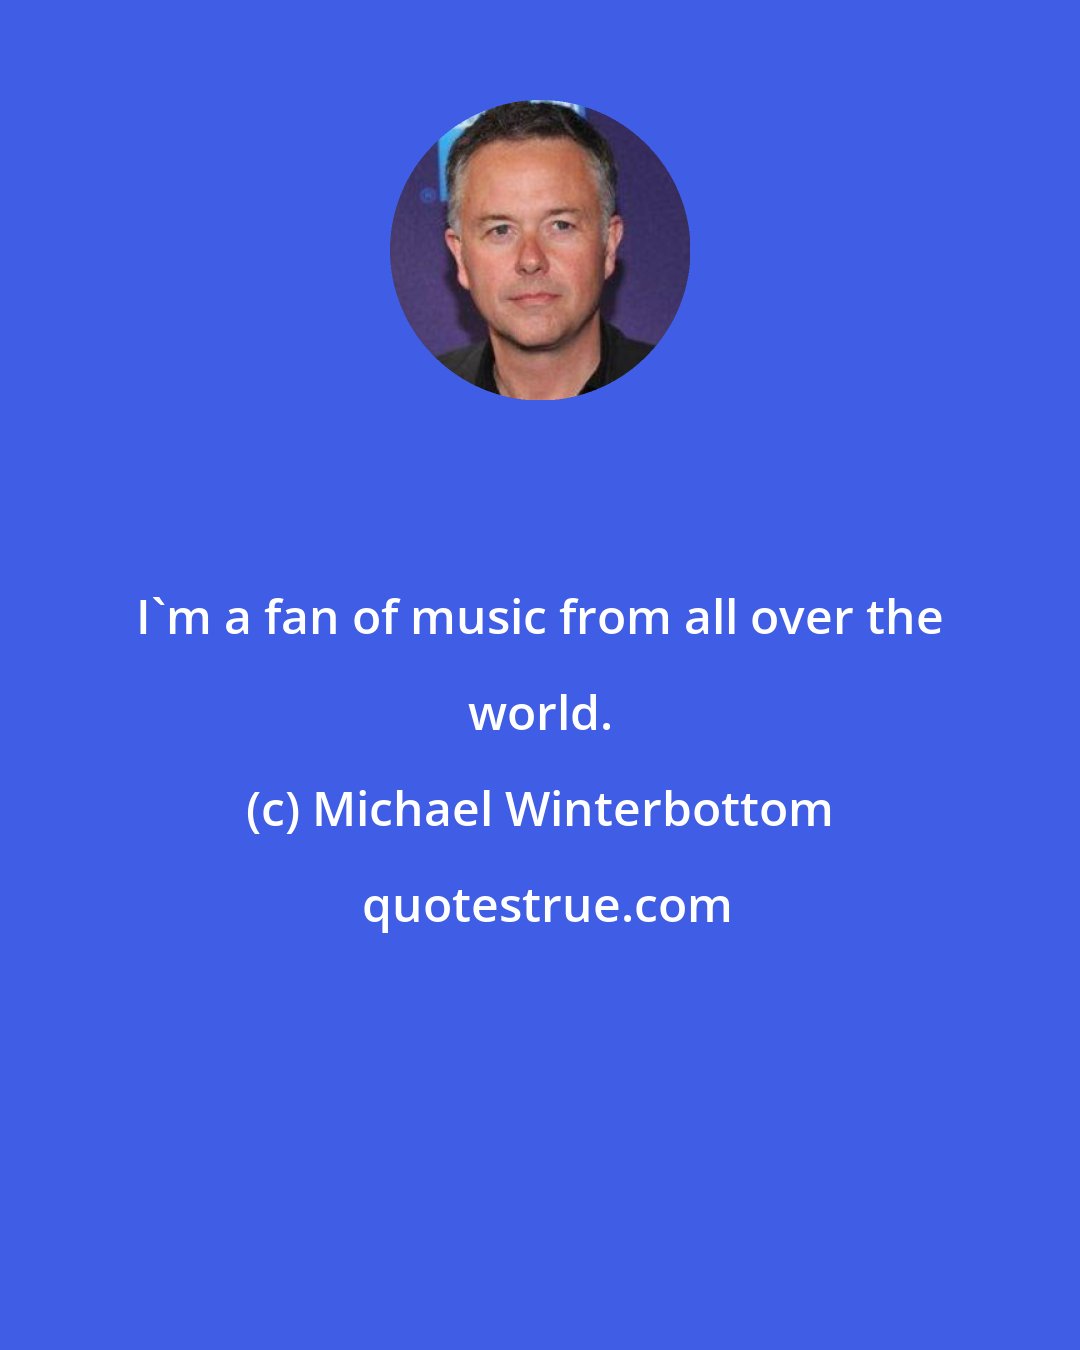 Michael Winterbottom: I'm a fan of music from all over the world.